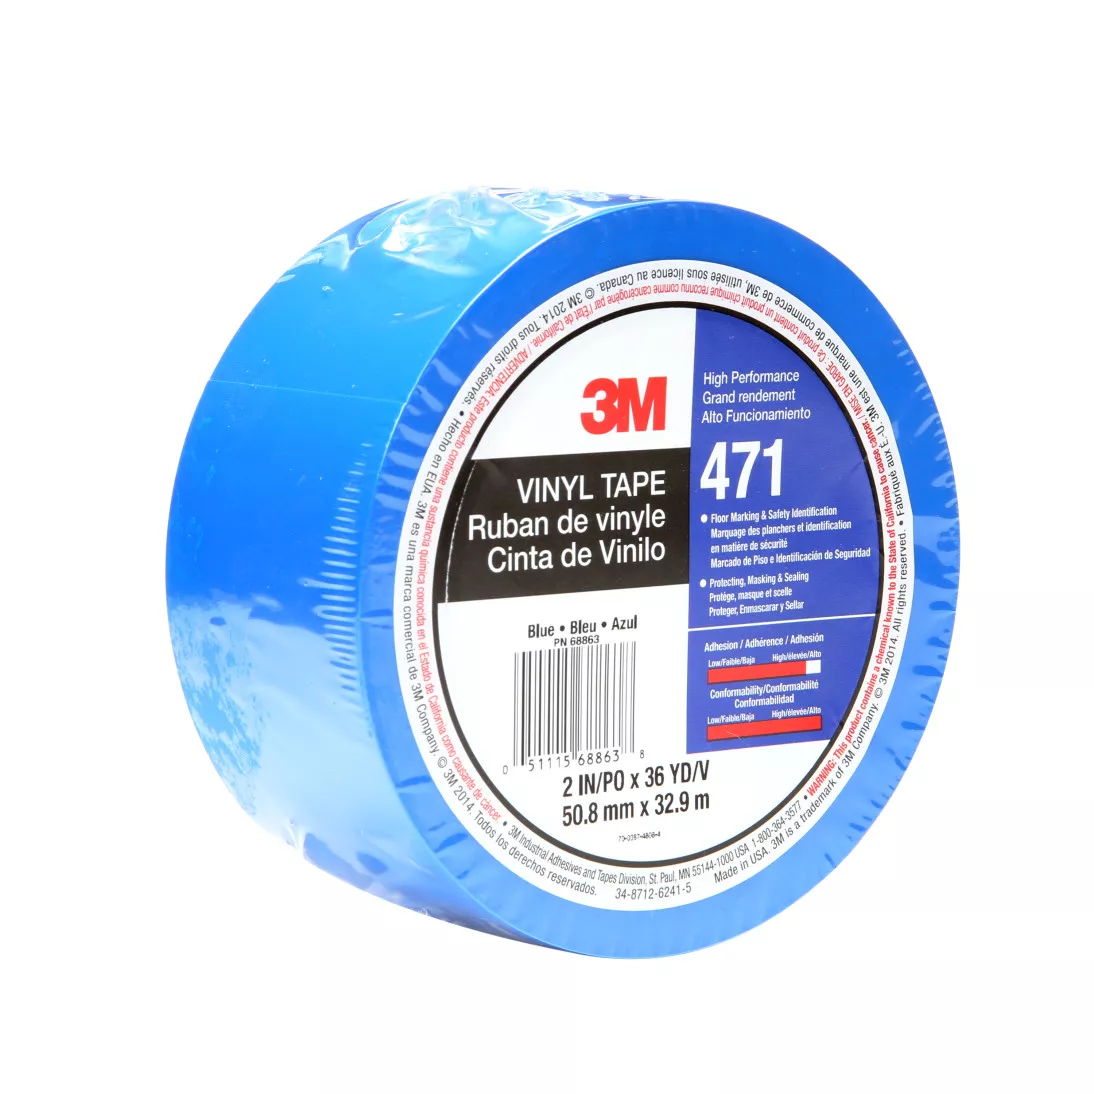 3M™ Vinyl Tape 471, Blue, 2 in x 36 yd, 5.2 mil, 24 rolls per case,
Individually Wrapped Conveniently Packaged